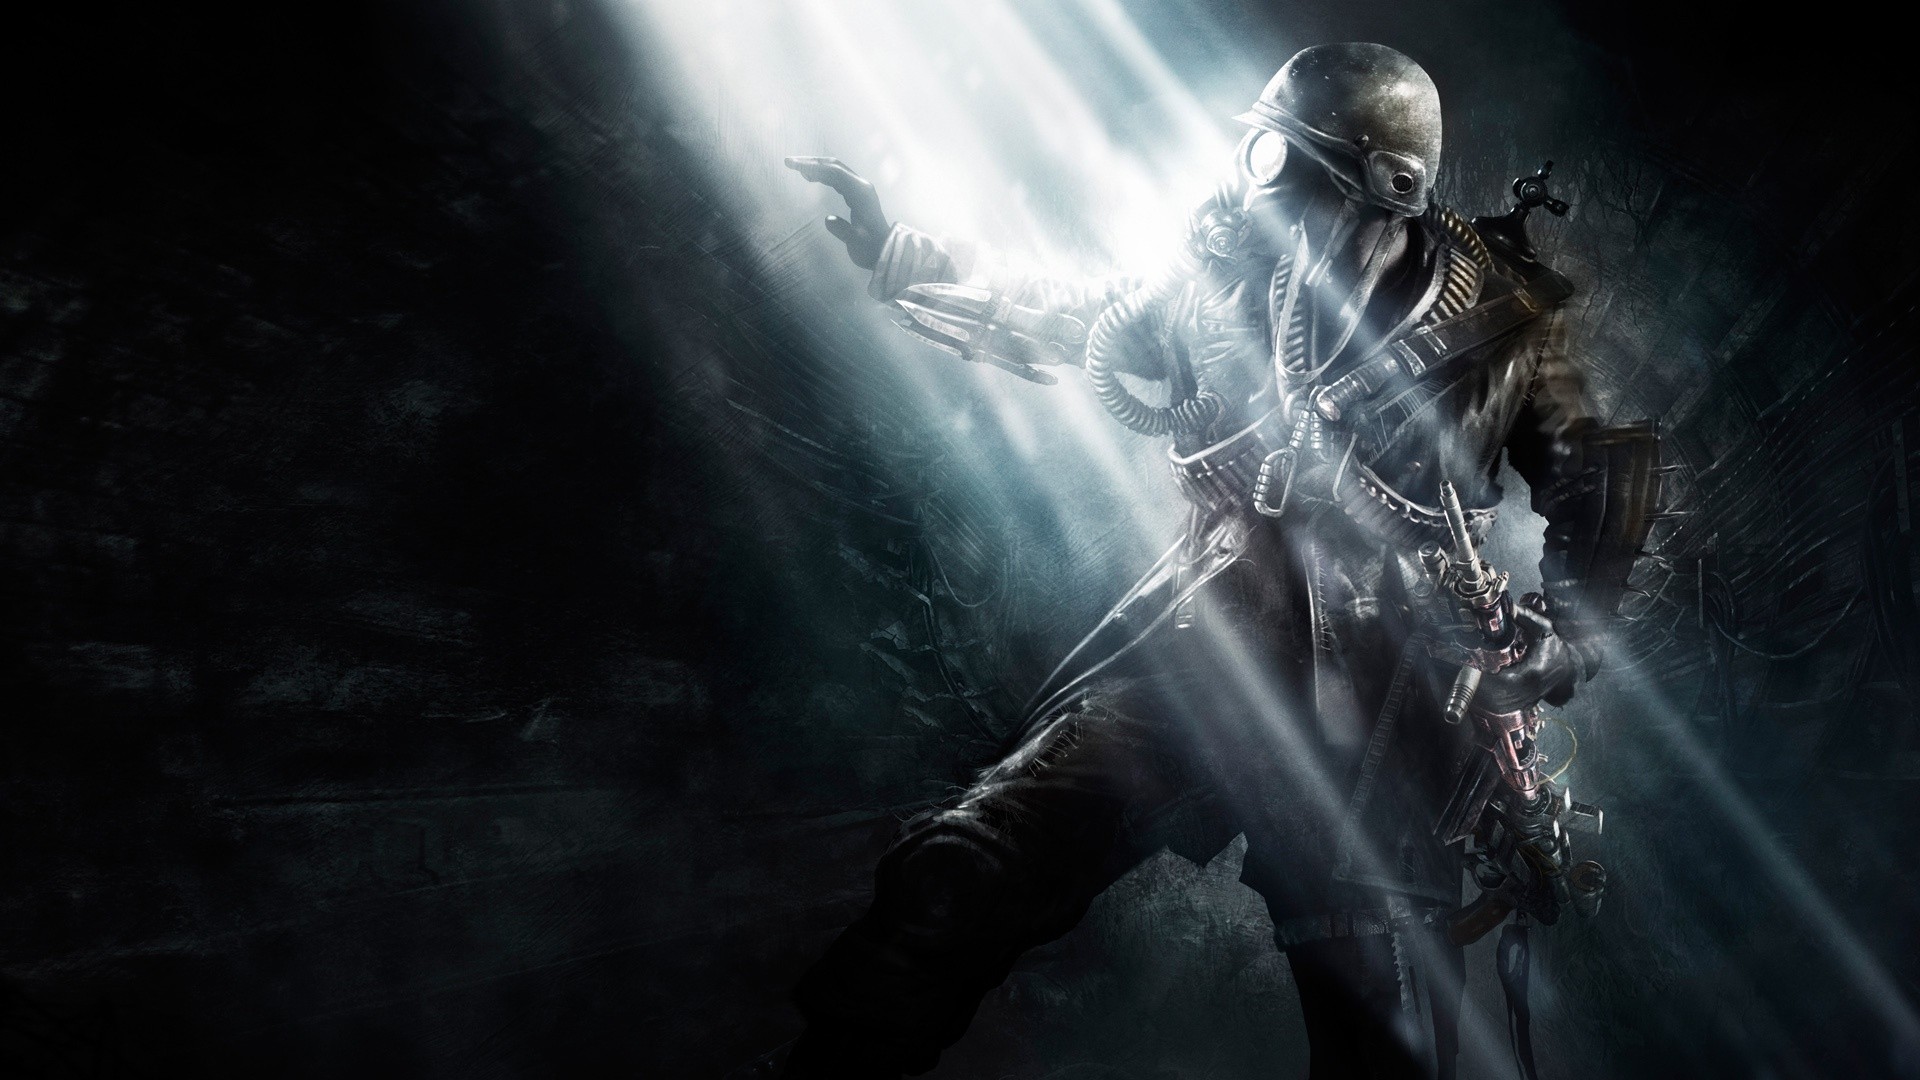 General 1920x1080 video games Metro: Last Light gas masks PC gaming science fiction video game art